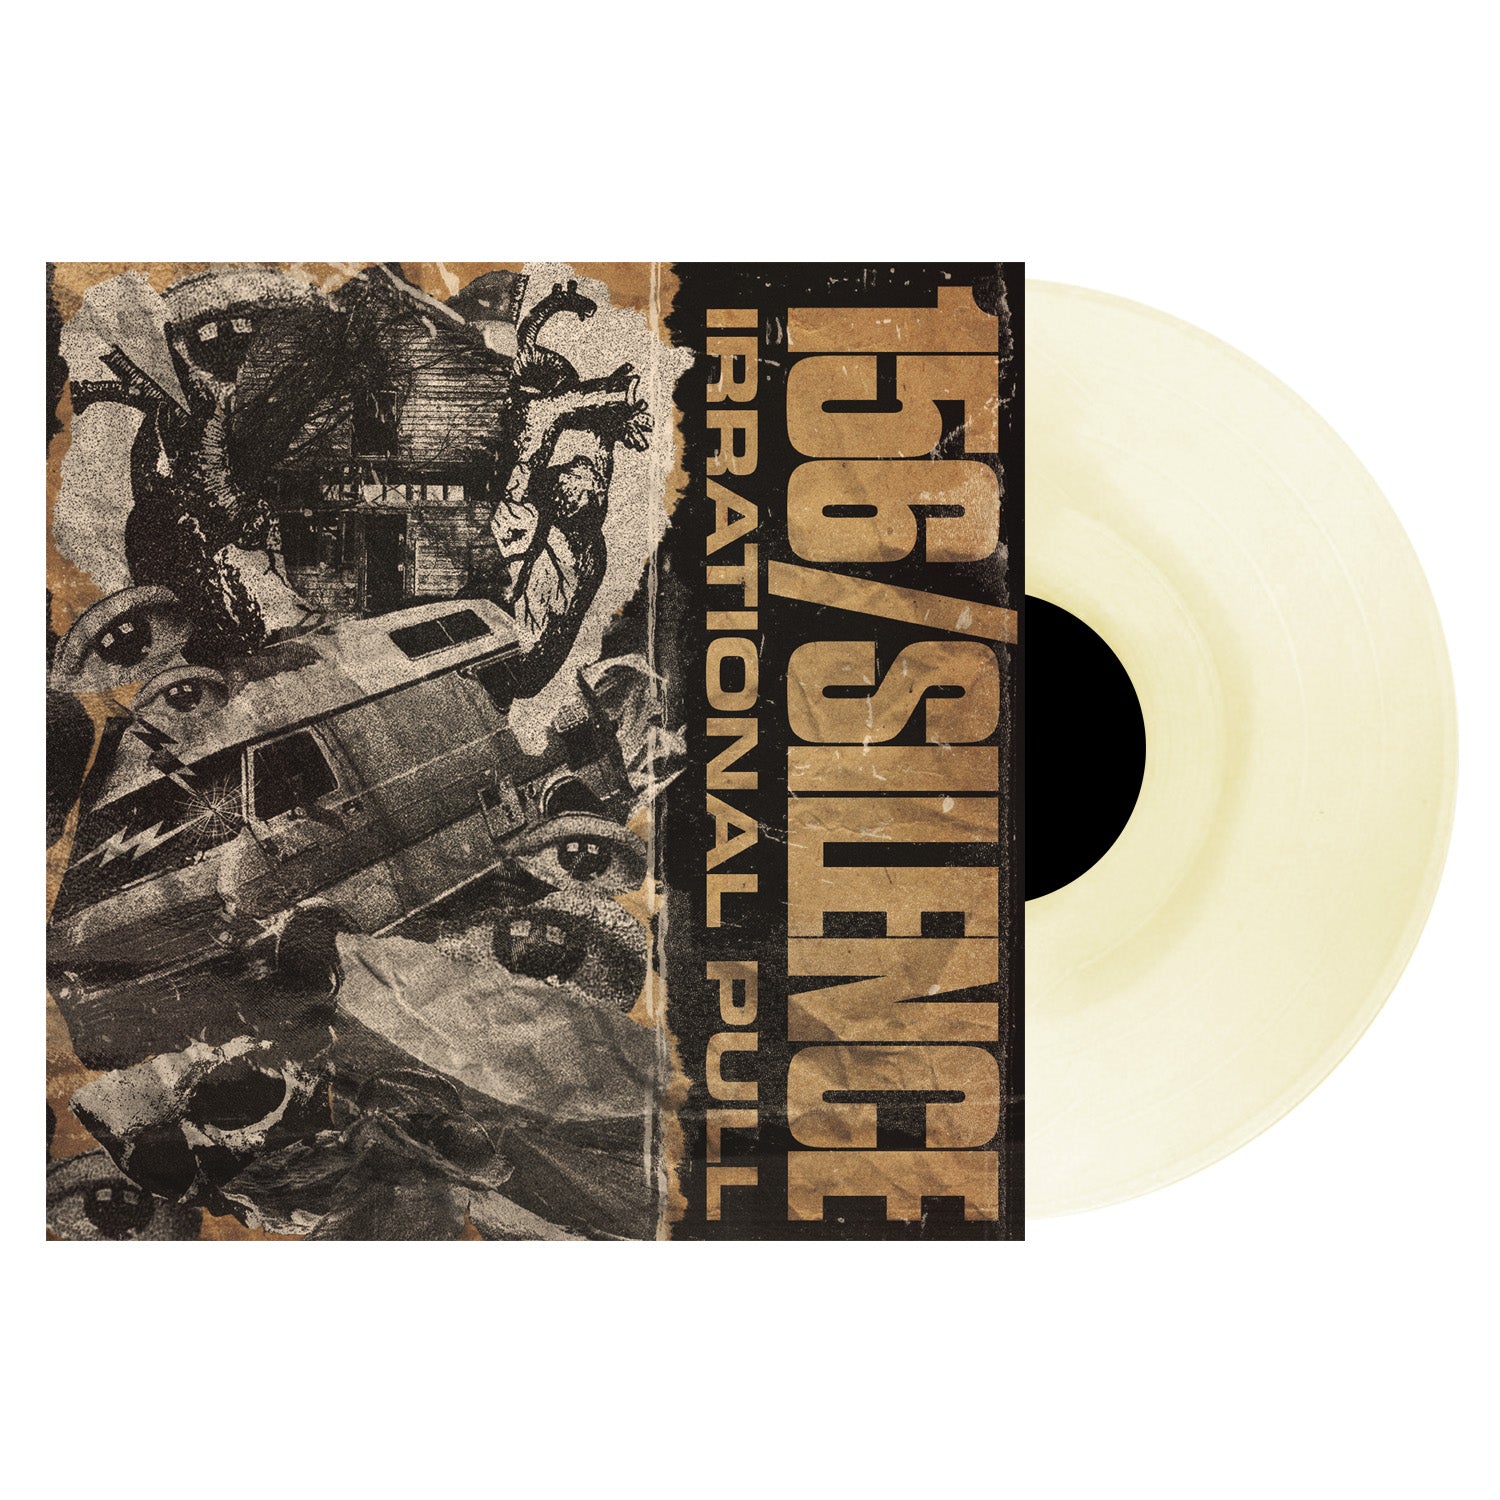 156/Silence - ‘Irrational Pull’ Beer in Milky Clear Vinyl LP